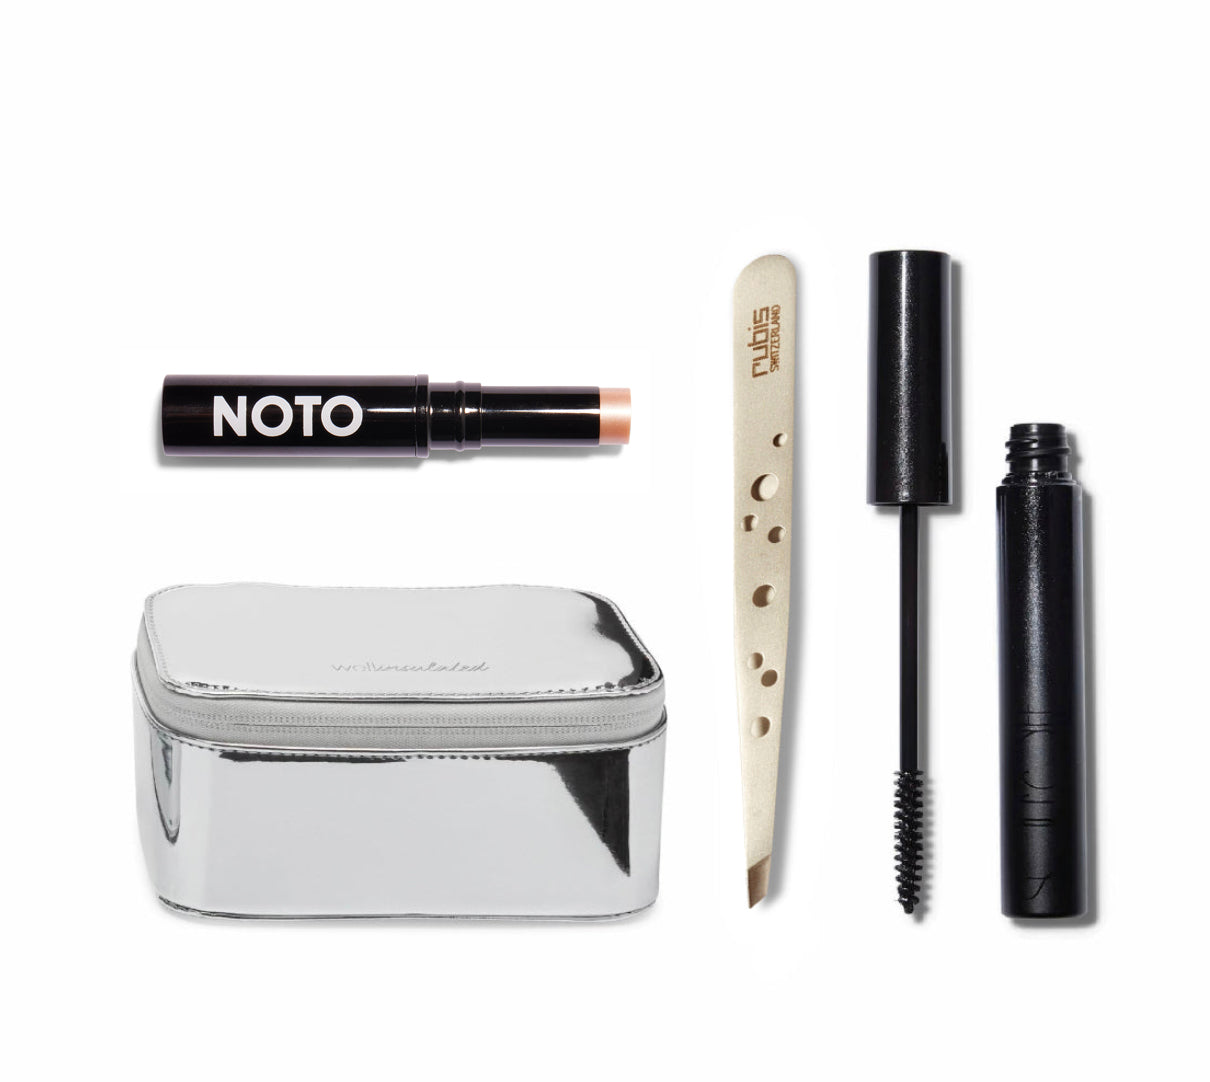 Grouping of the products in The Fiona Edit Set. Noto Botanics Hydra Highlighter, Well Insulated Performance Case Mini, Rubis Slant Tweezers, Surratt Relevee Mascara.